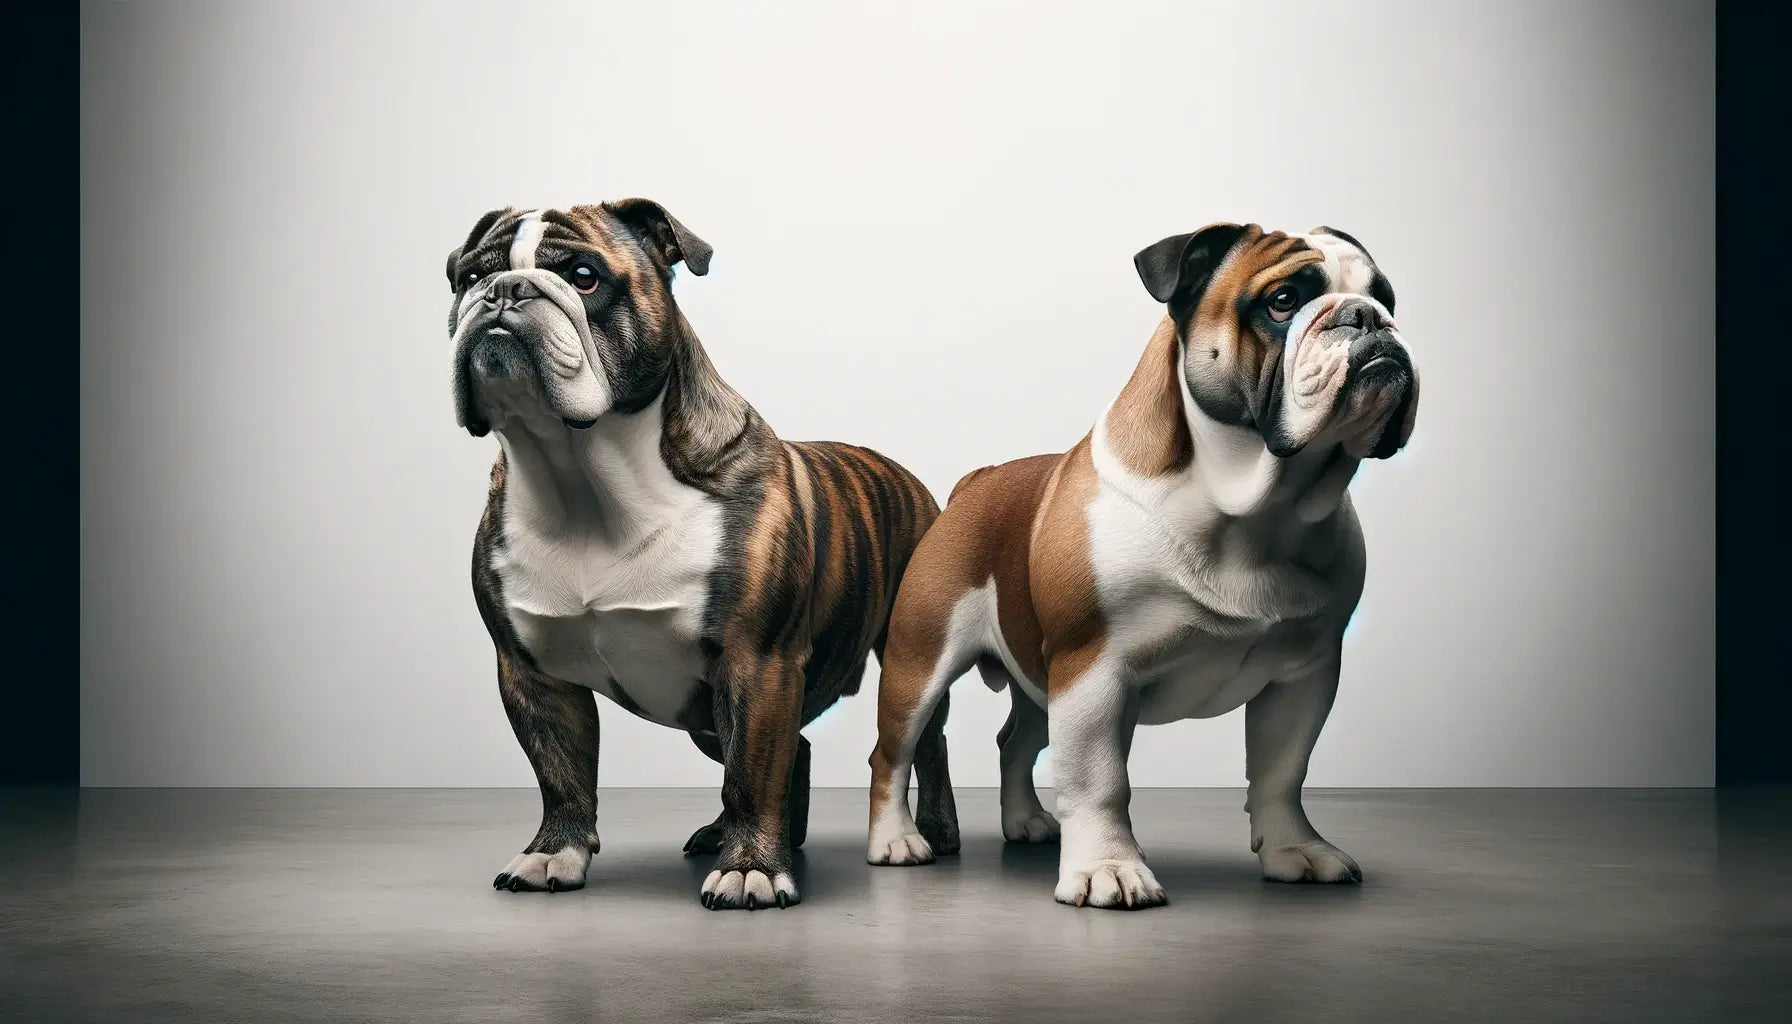 Olde English Bulldogge with a slightly darker brindle coat exhibits its leaner athletic build.